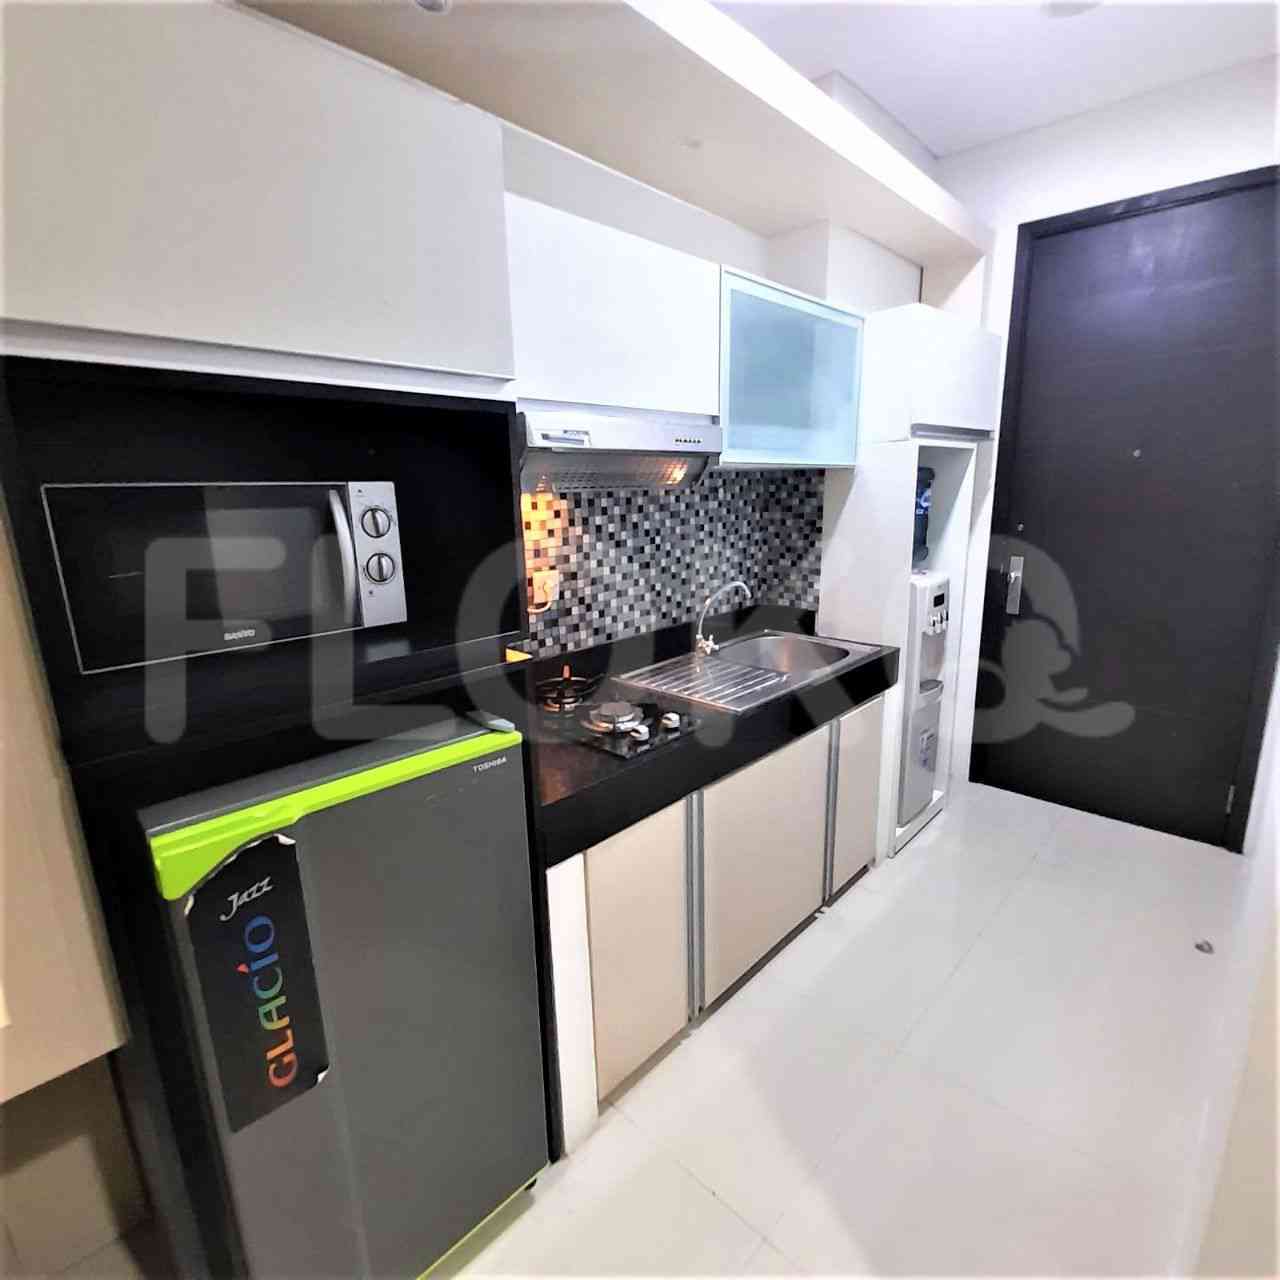 2 Bedroom on 27th Floor for Rent in GP Plaza Apartment - ftadcc 2